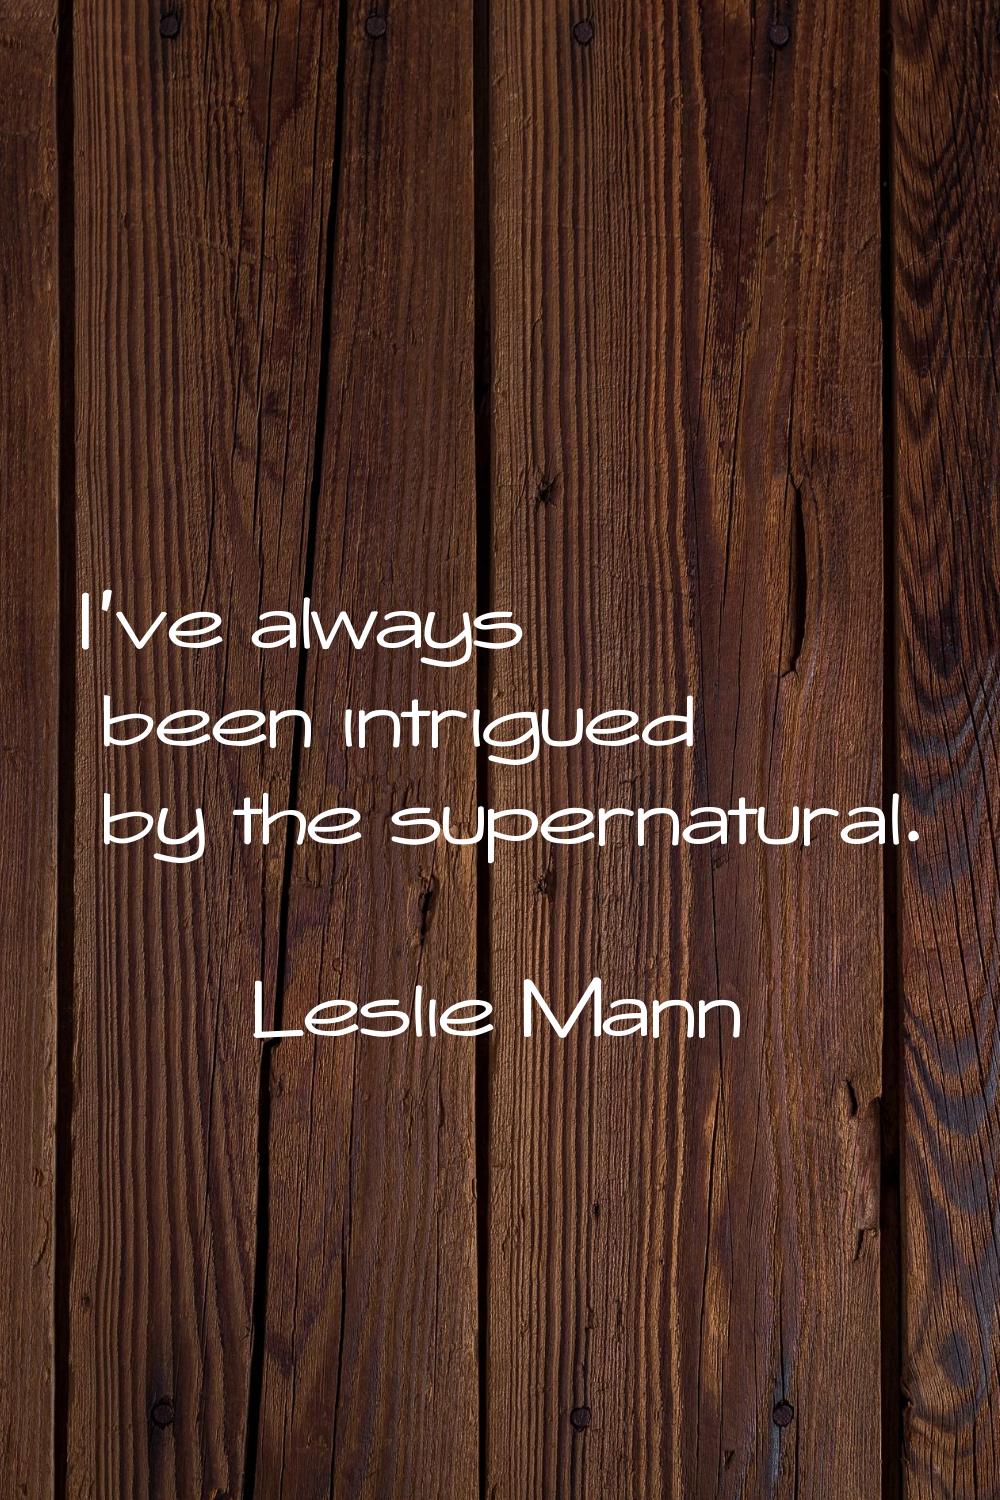 I've always been intrigued by the supernatural.